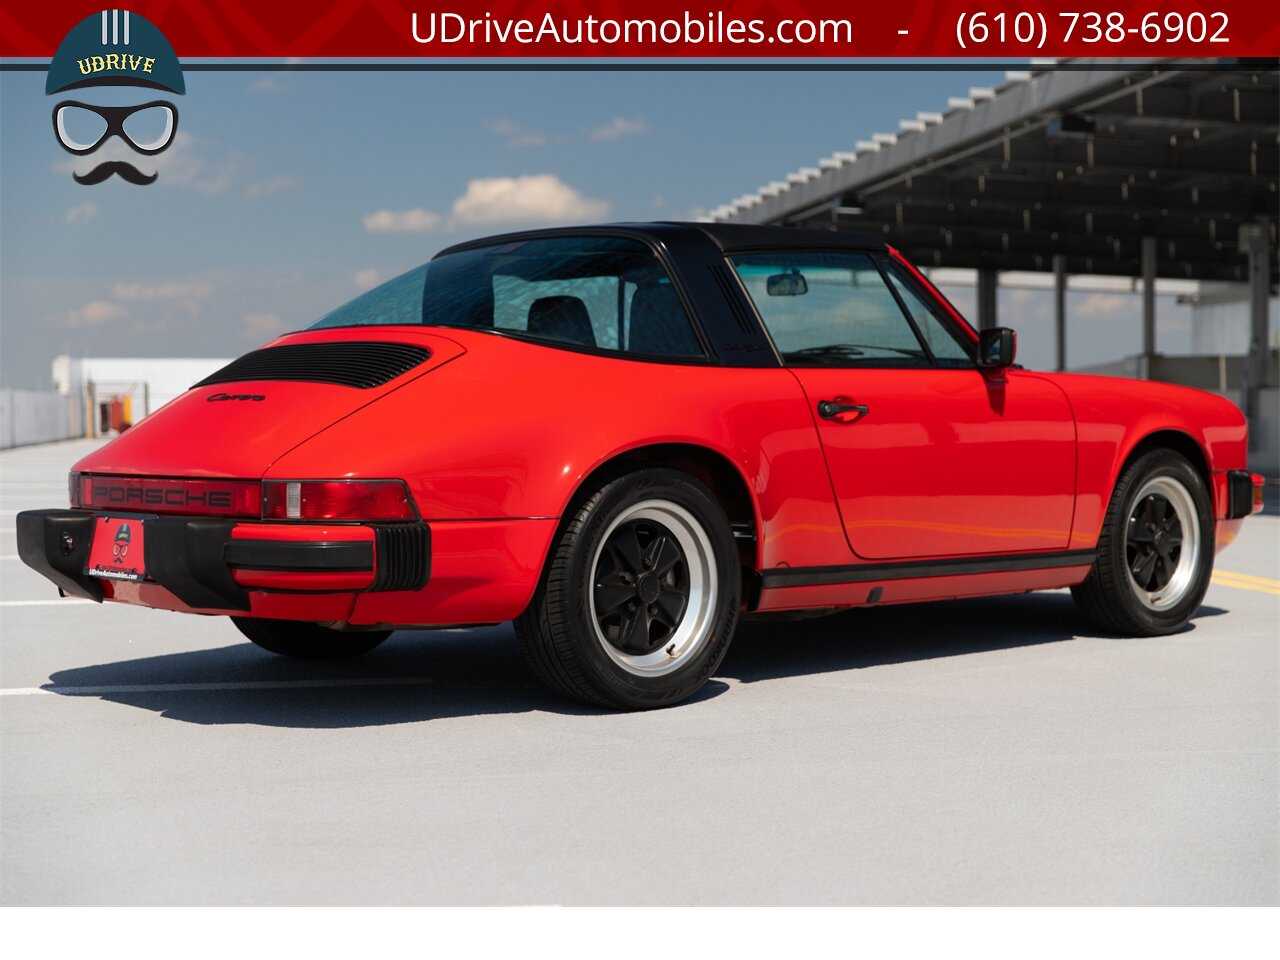 1986 Porsche 911 Carrera Targa 39k Miles Same Owner Since 1988  $23k in Service History Since 2011 - Photo 20 - West Chester, PA 19382